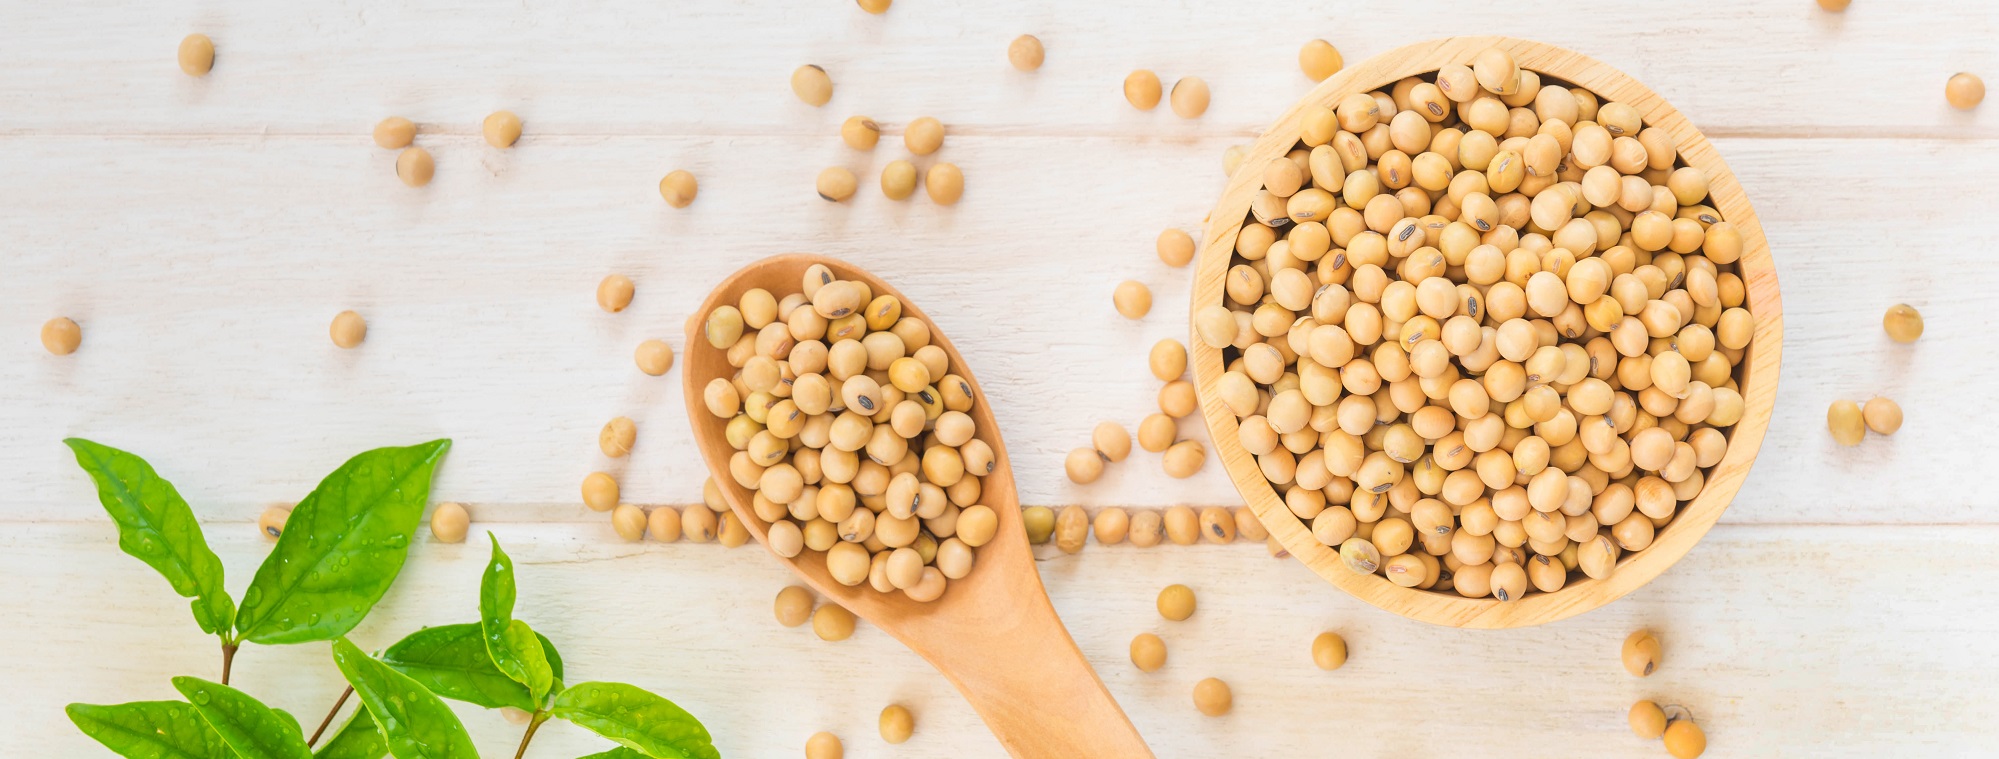 Soybeans are one of the most nutritious legumes